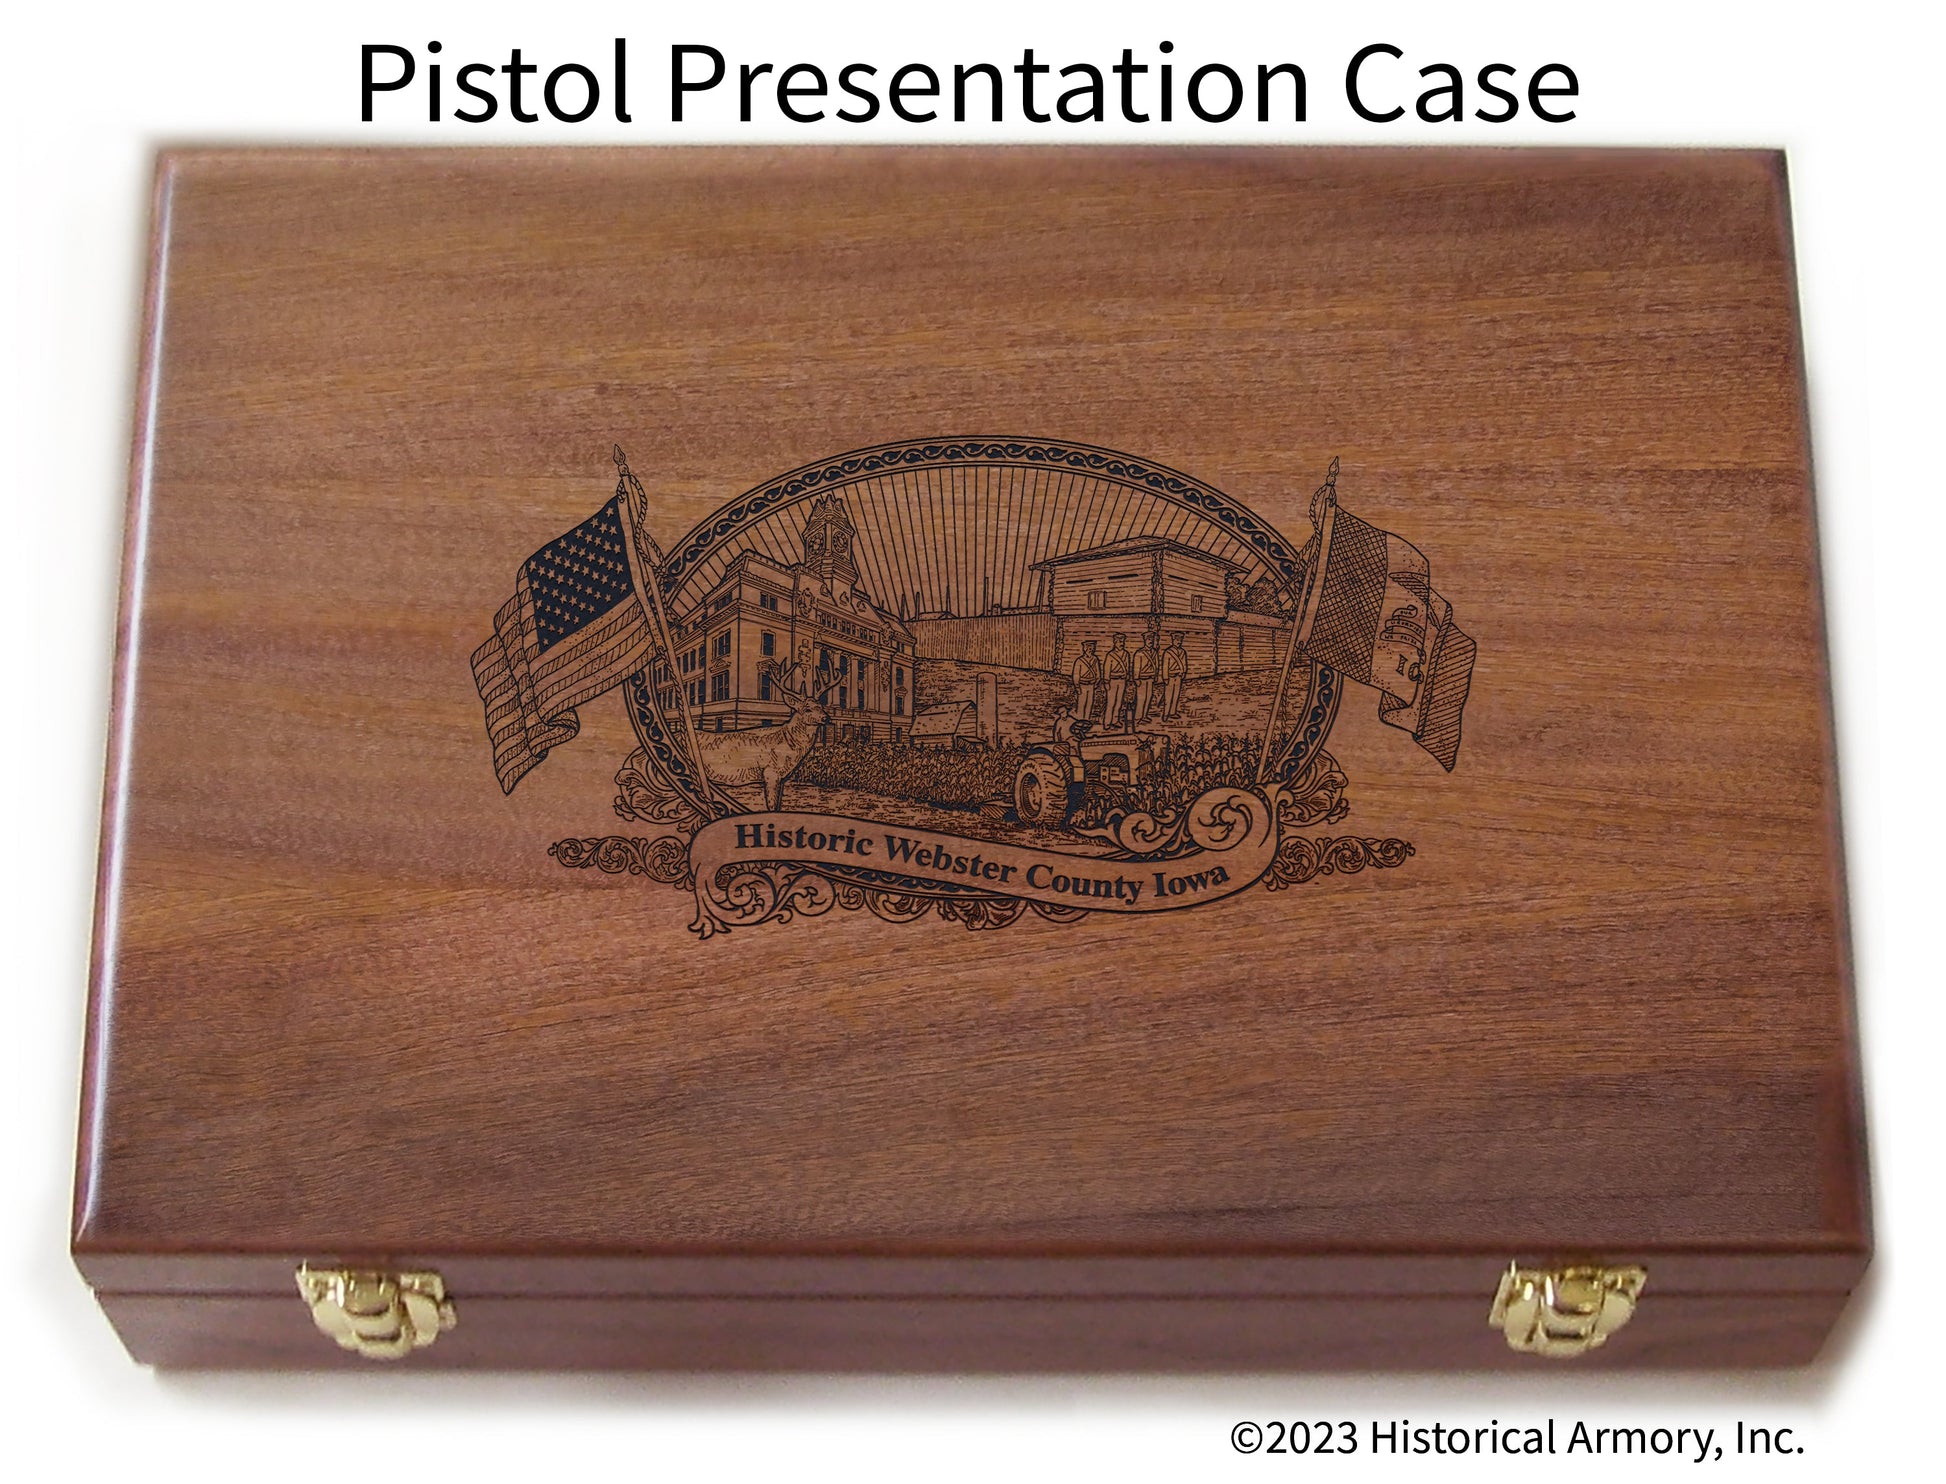 Webster County Iowa Engraved .45 Auto Ruger 1911 Presentation Case